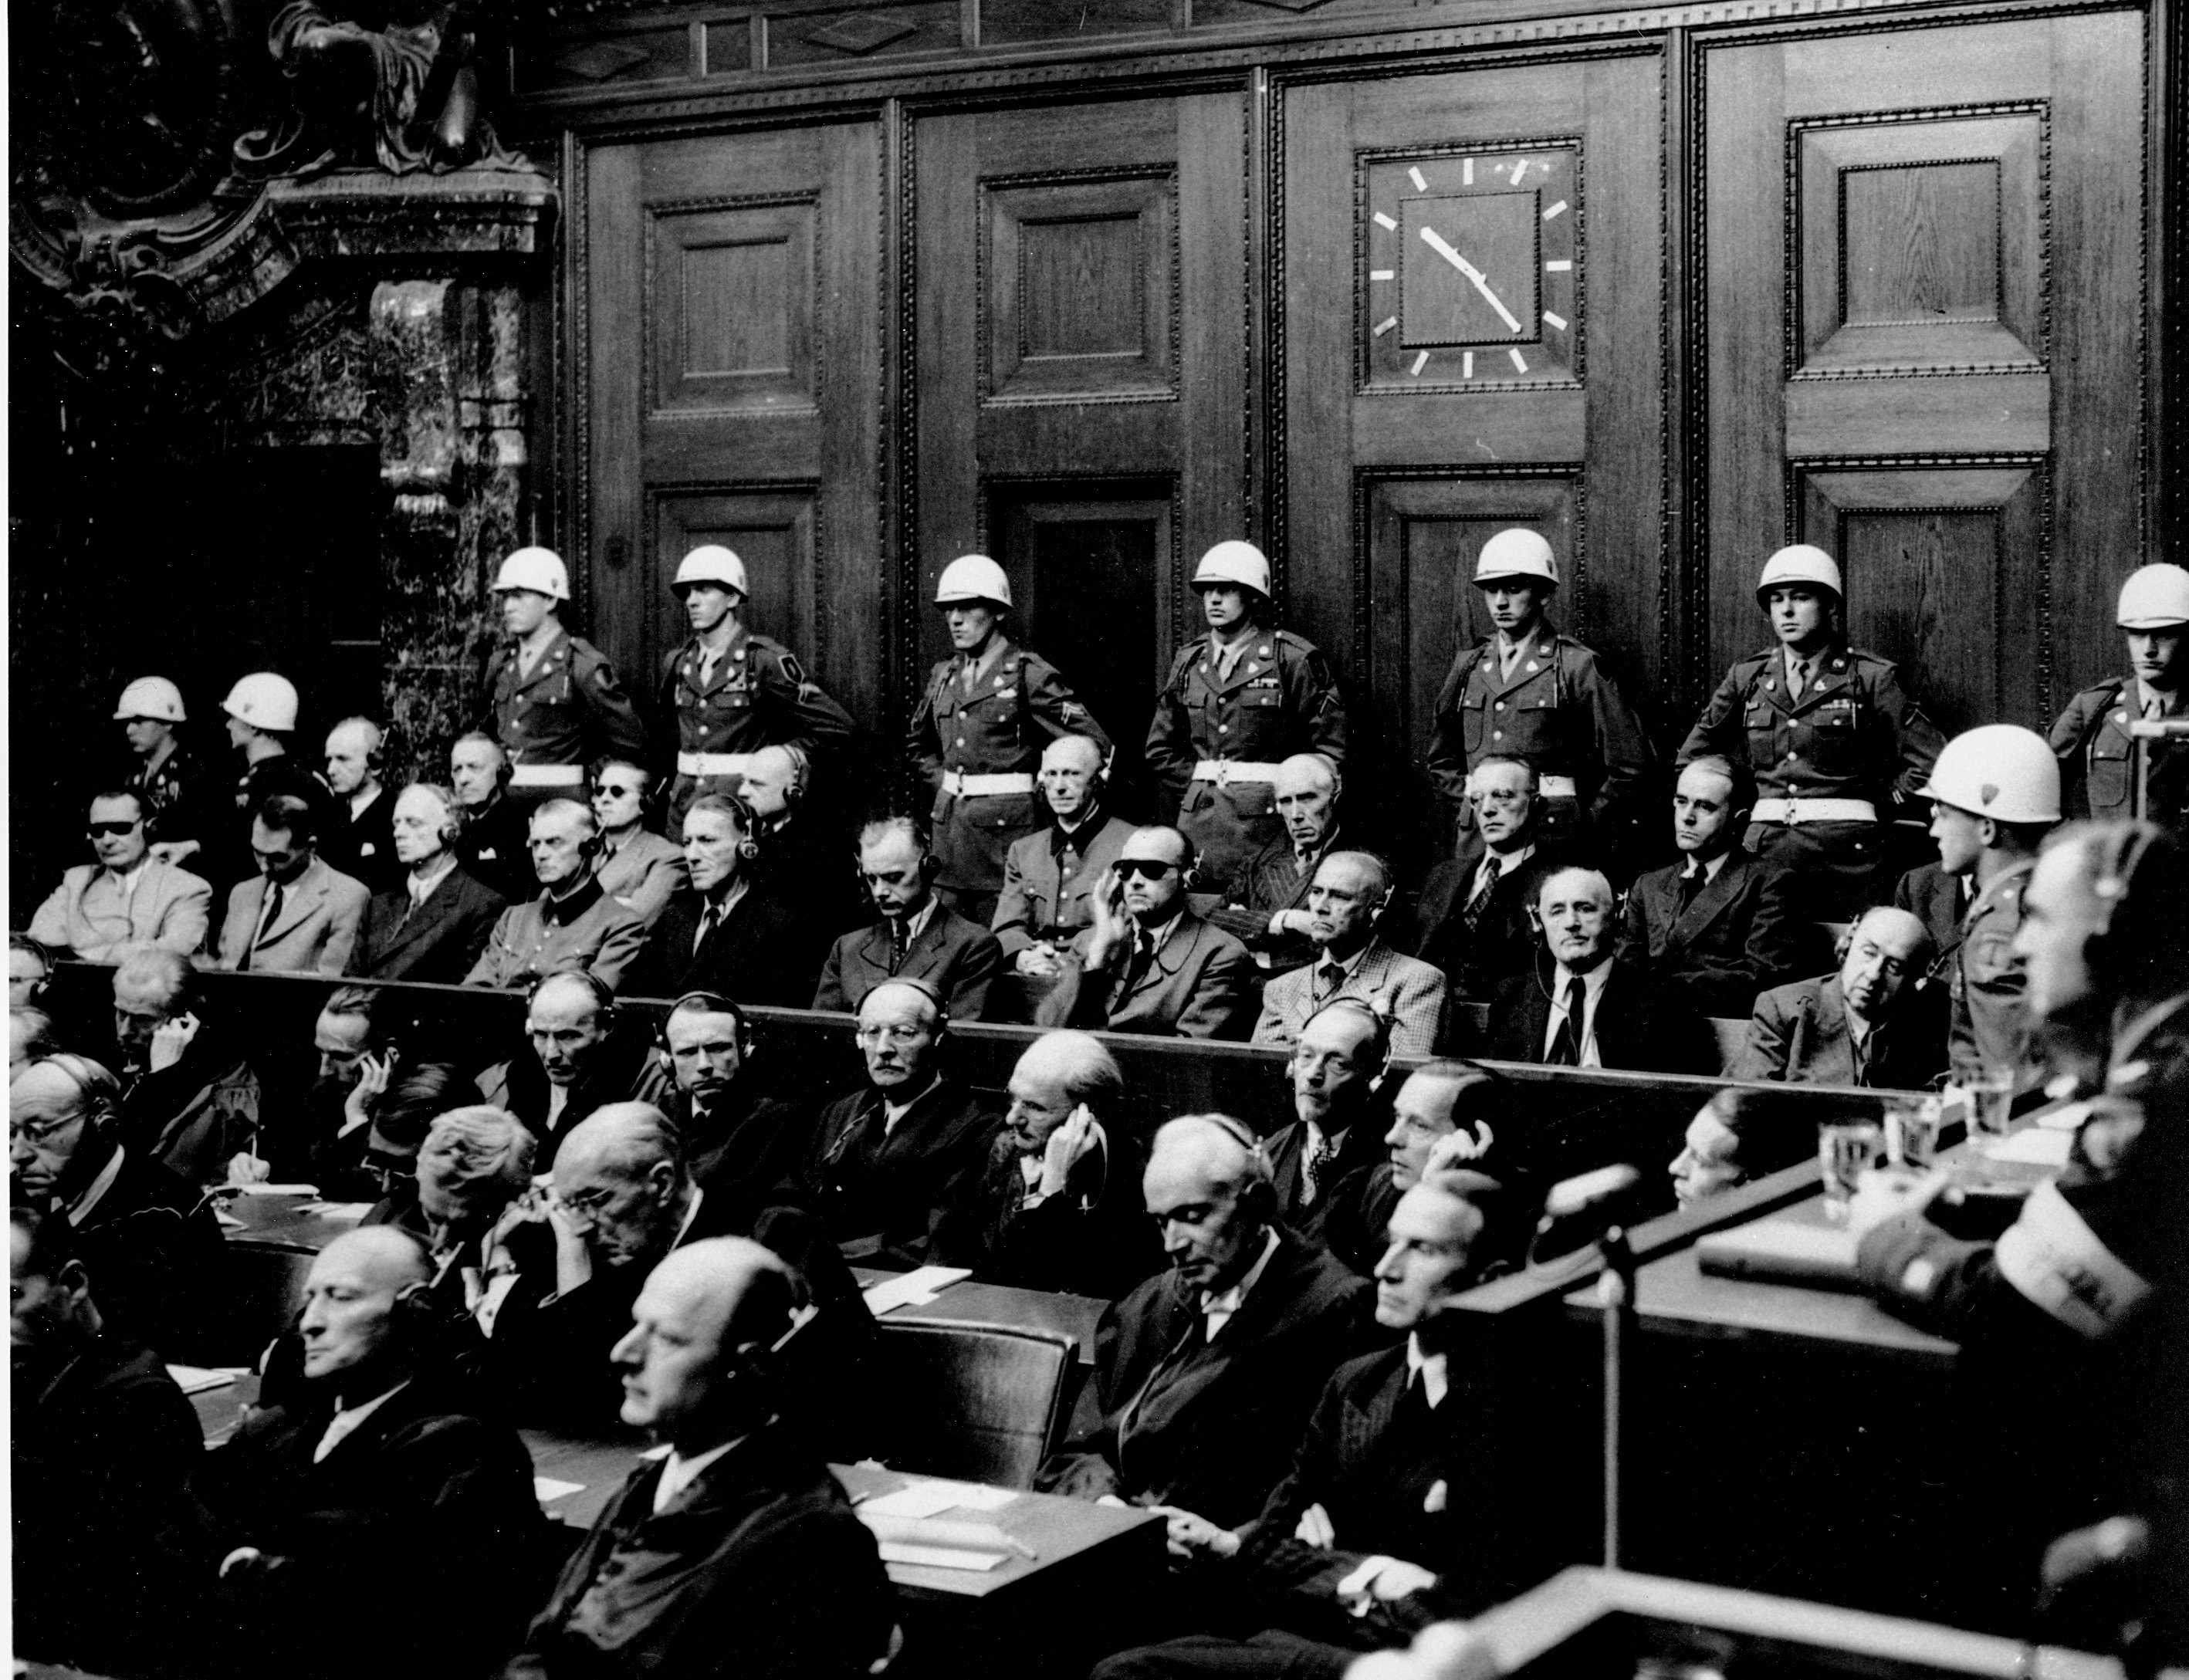 In this Sept. 30, 1946 b/w file picture defendants hear parts of the verdict in the Palace of Justice at the Nuremberg War Crimes Trial in Germany on Sept. 30, 1946